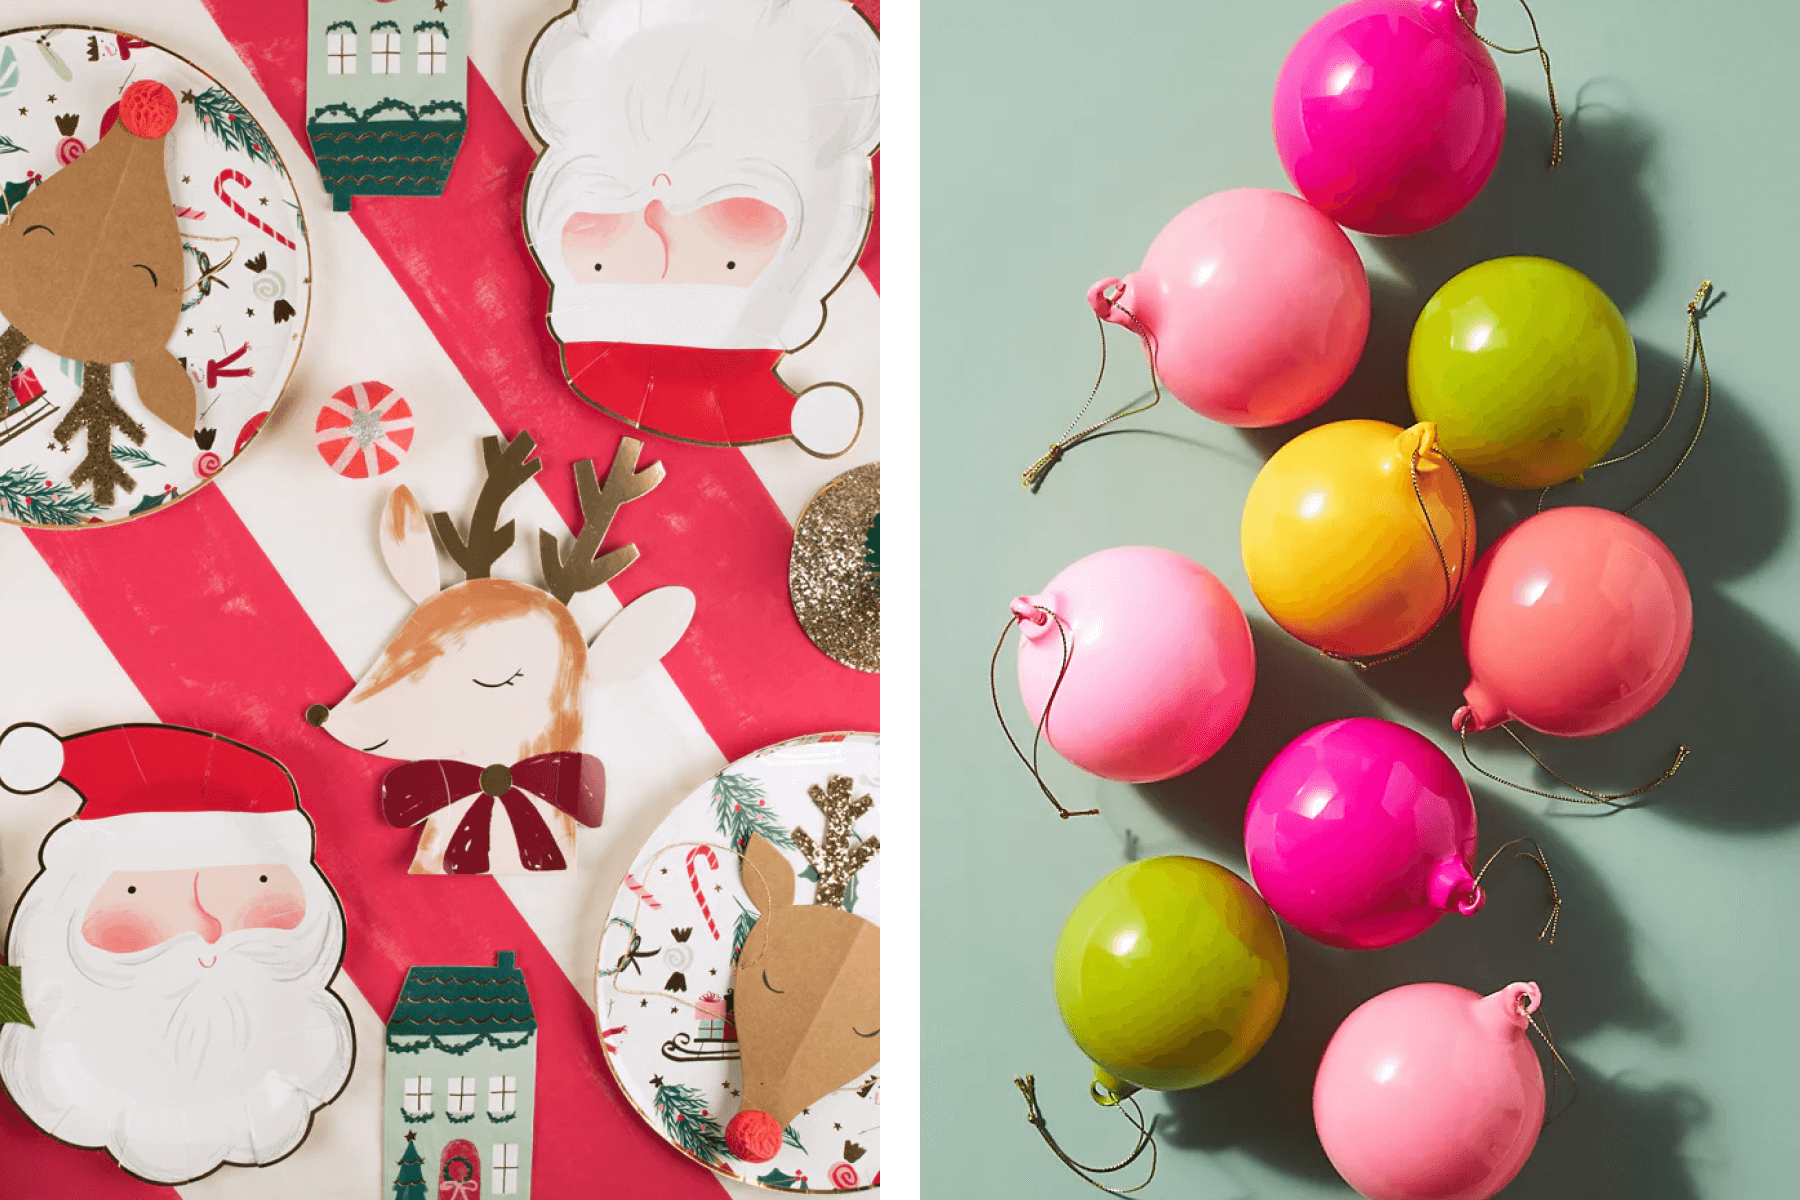 Left: An overhead photograph of holiday table items like a Santa-shaped plate and a reindeer-shaped napkin; right: An overhead shot of bright pink, green, and yellow ornaments.